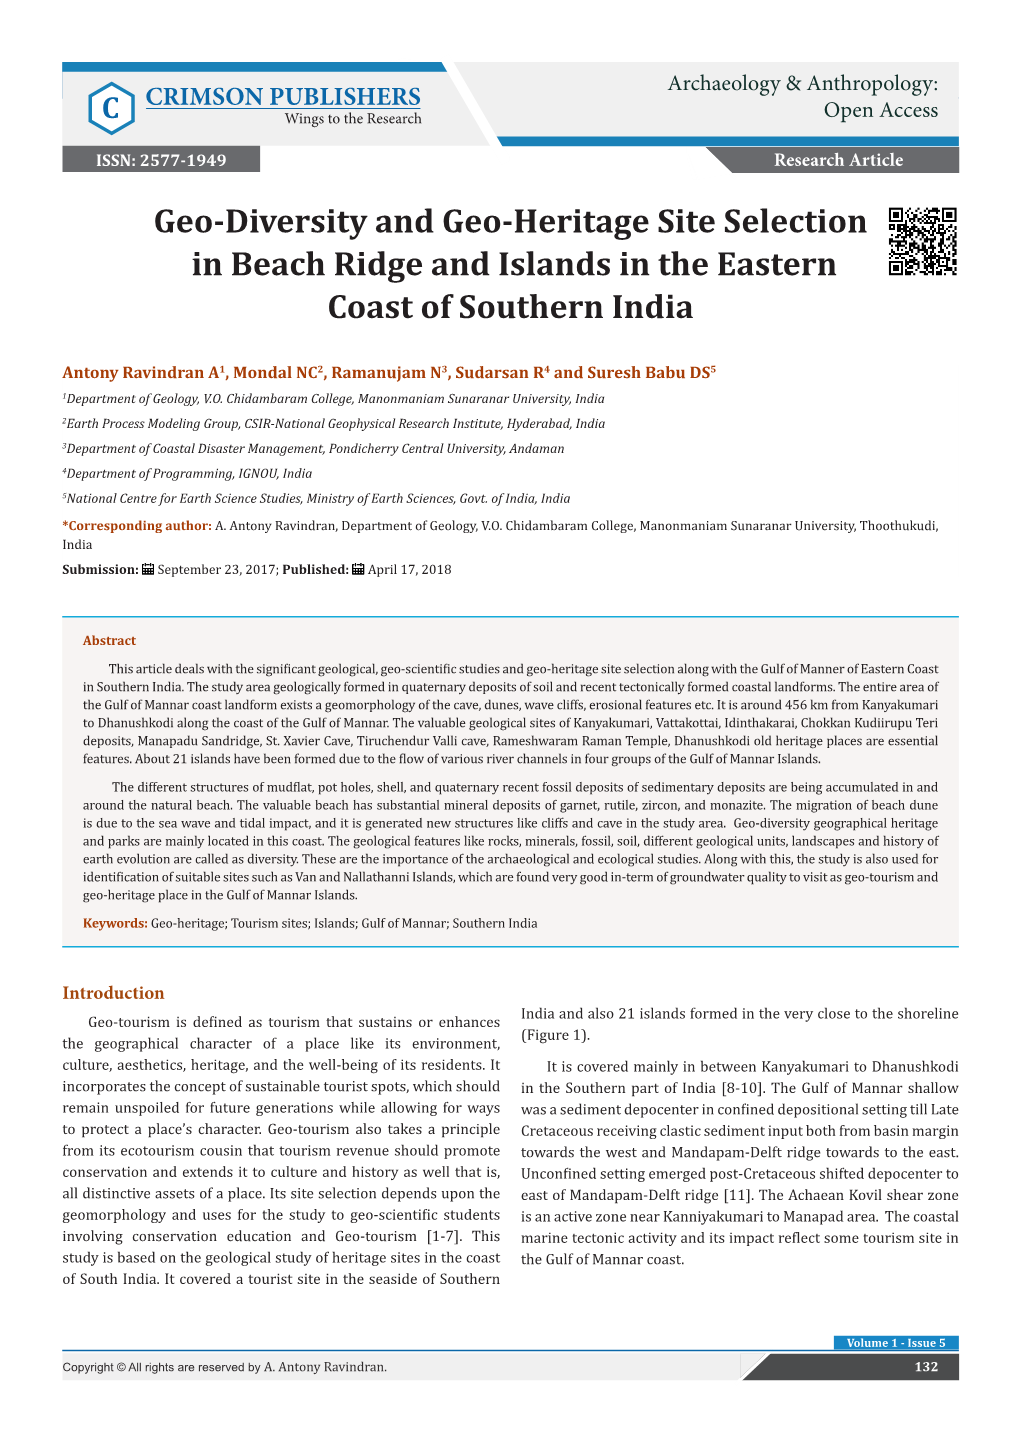 Geo-Diversity and Geo-Heritage Site Selection in Beach Ridge and Islands in the Eastern Coast of Southern India